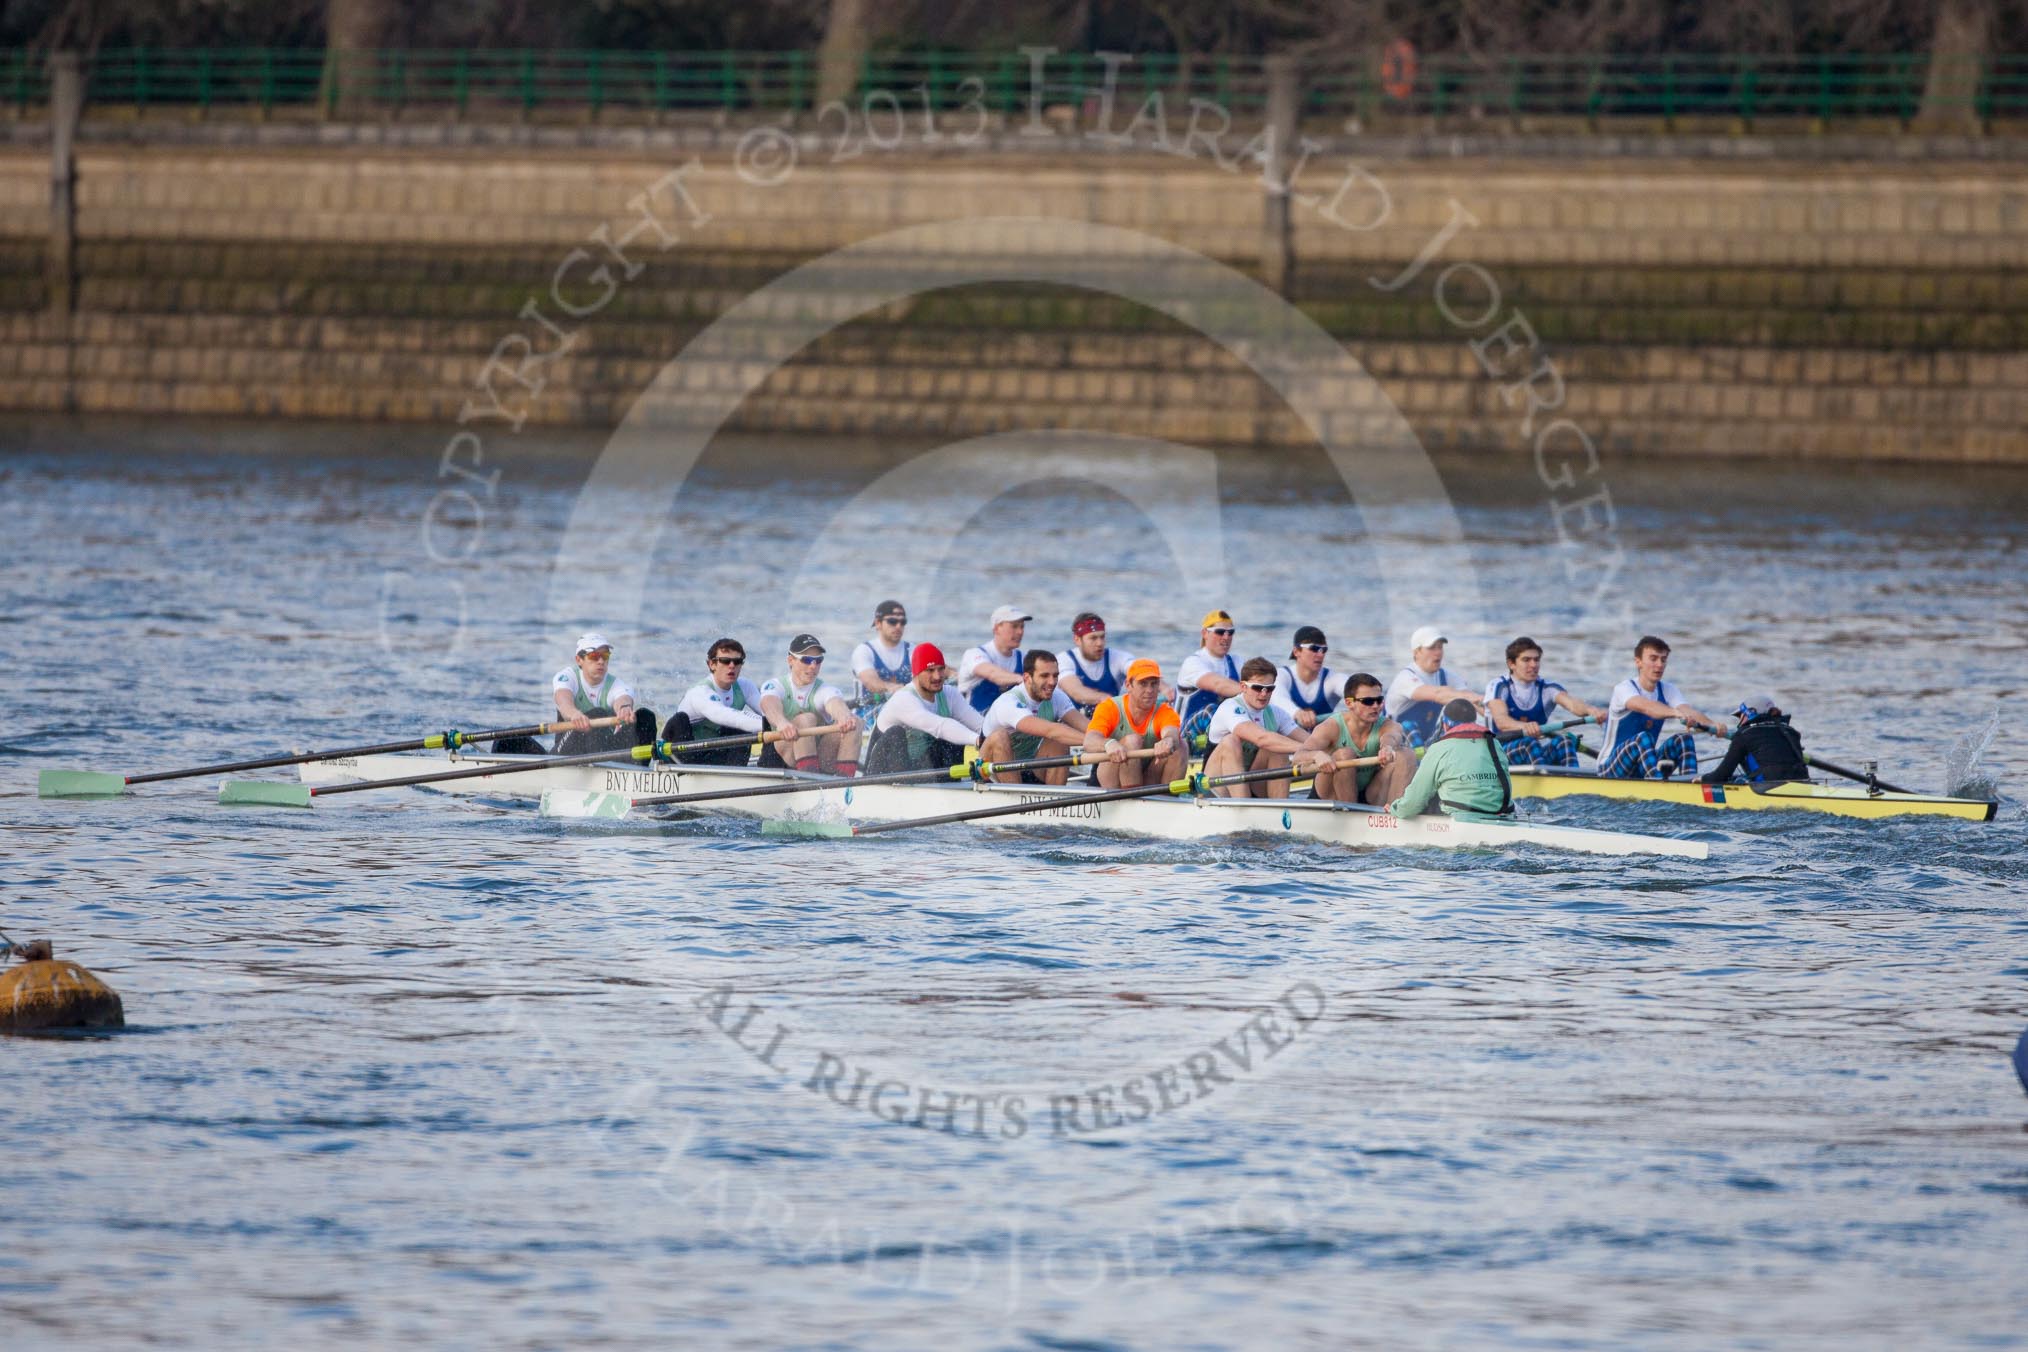 The Boat Race season 2013 - fixture CUBC vs Leander: The Goldie vs Imperial BC fixture..
River Thames Tideway between Putney Bridge and Mortlake,
London SW15,

United Kingdom,
on 02 March 2013 at 15:23, image #54